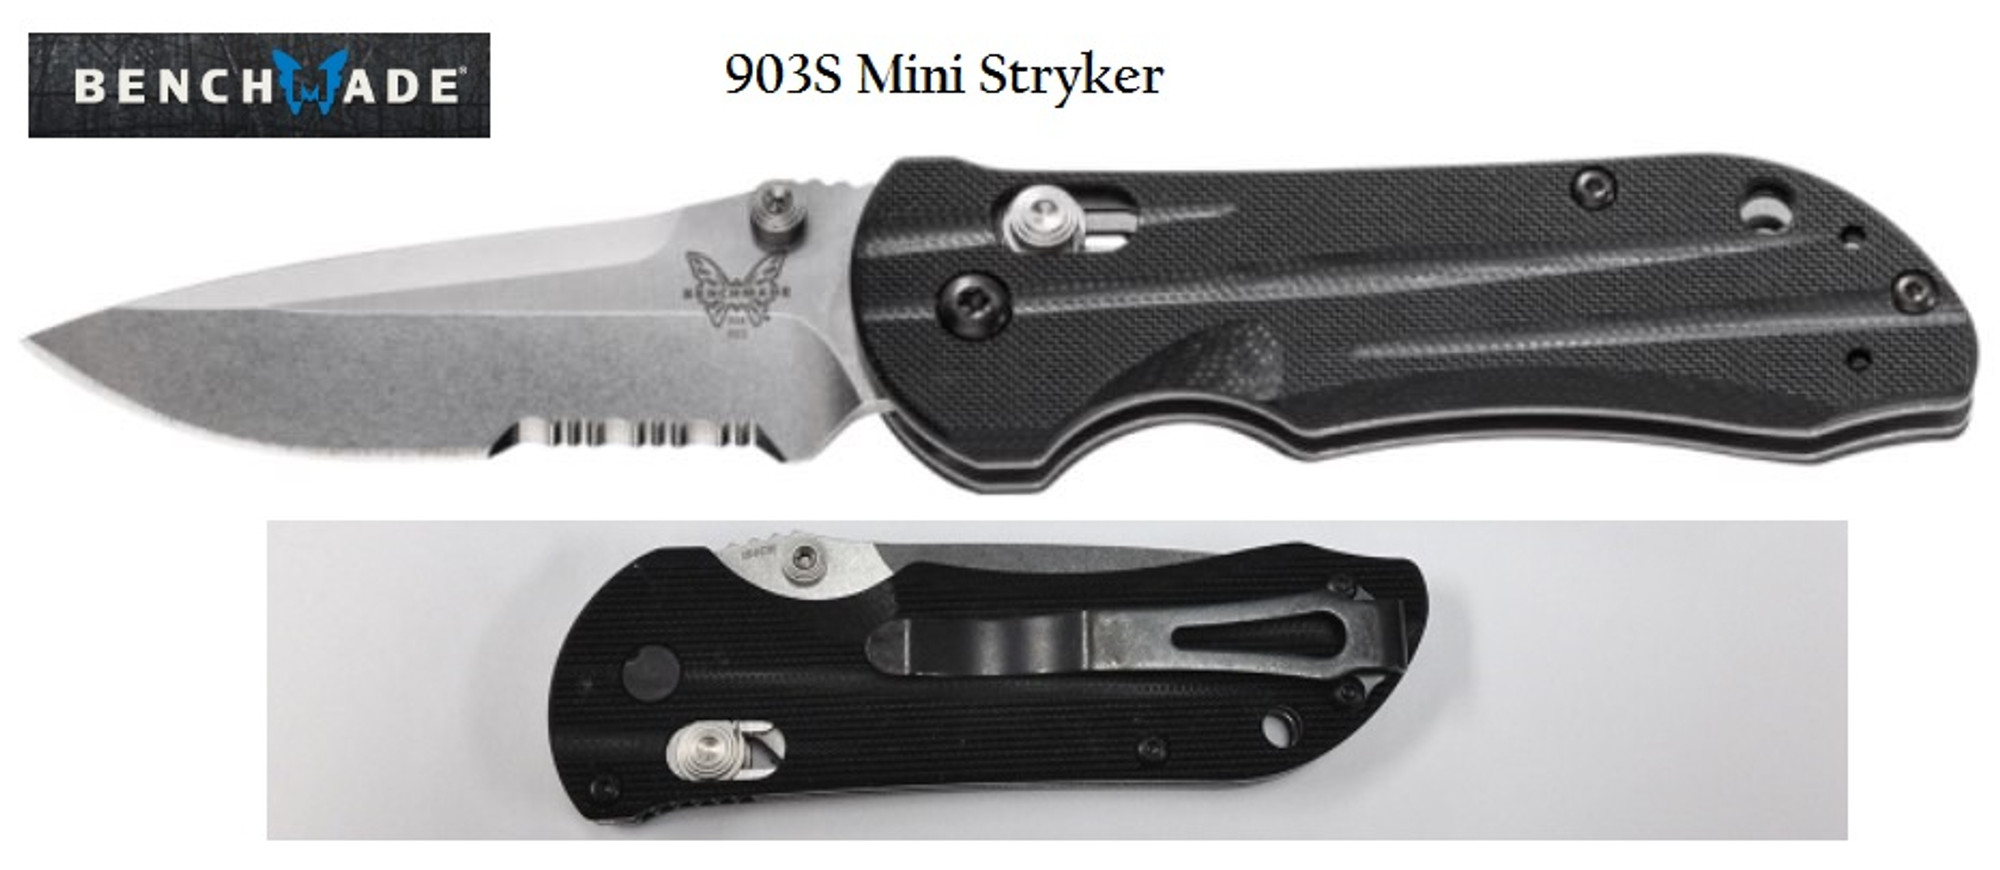 Benchmade 903S Mini Stryker - Partially Serrated